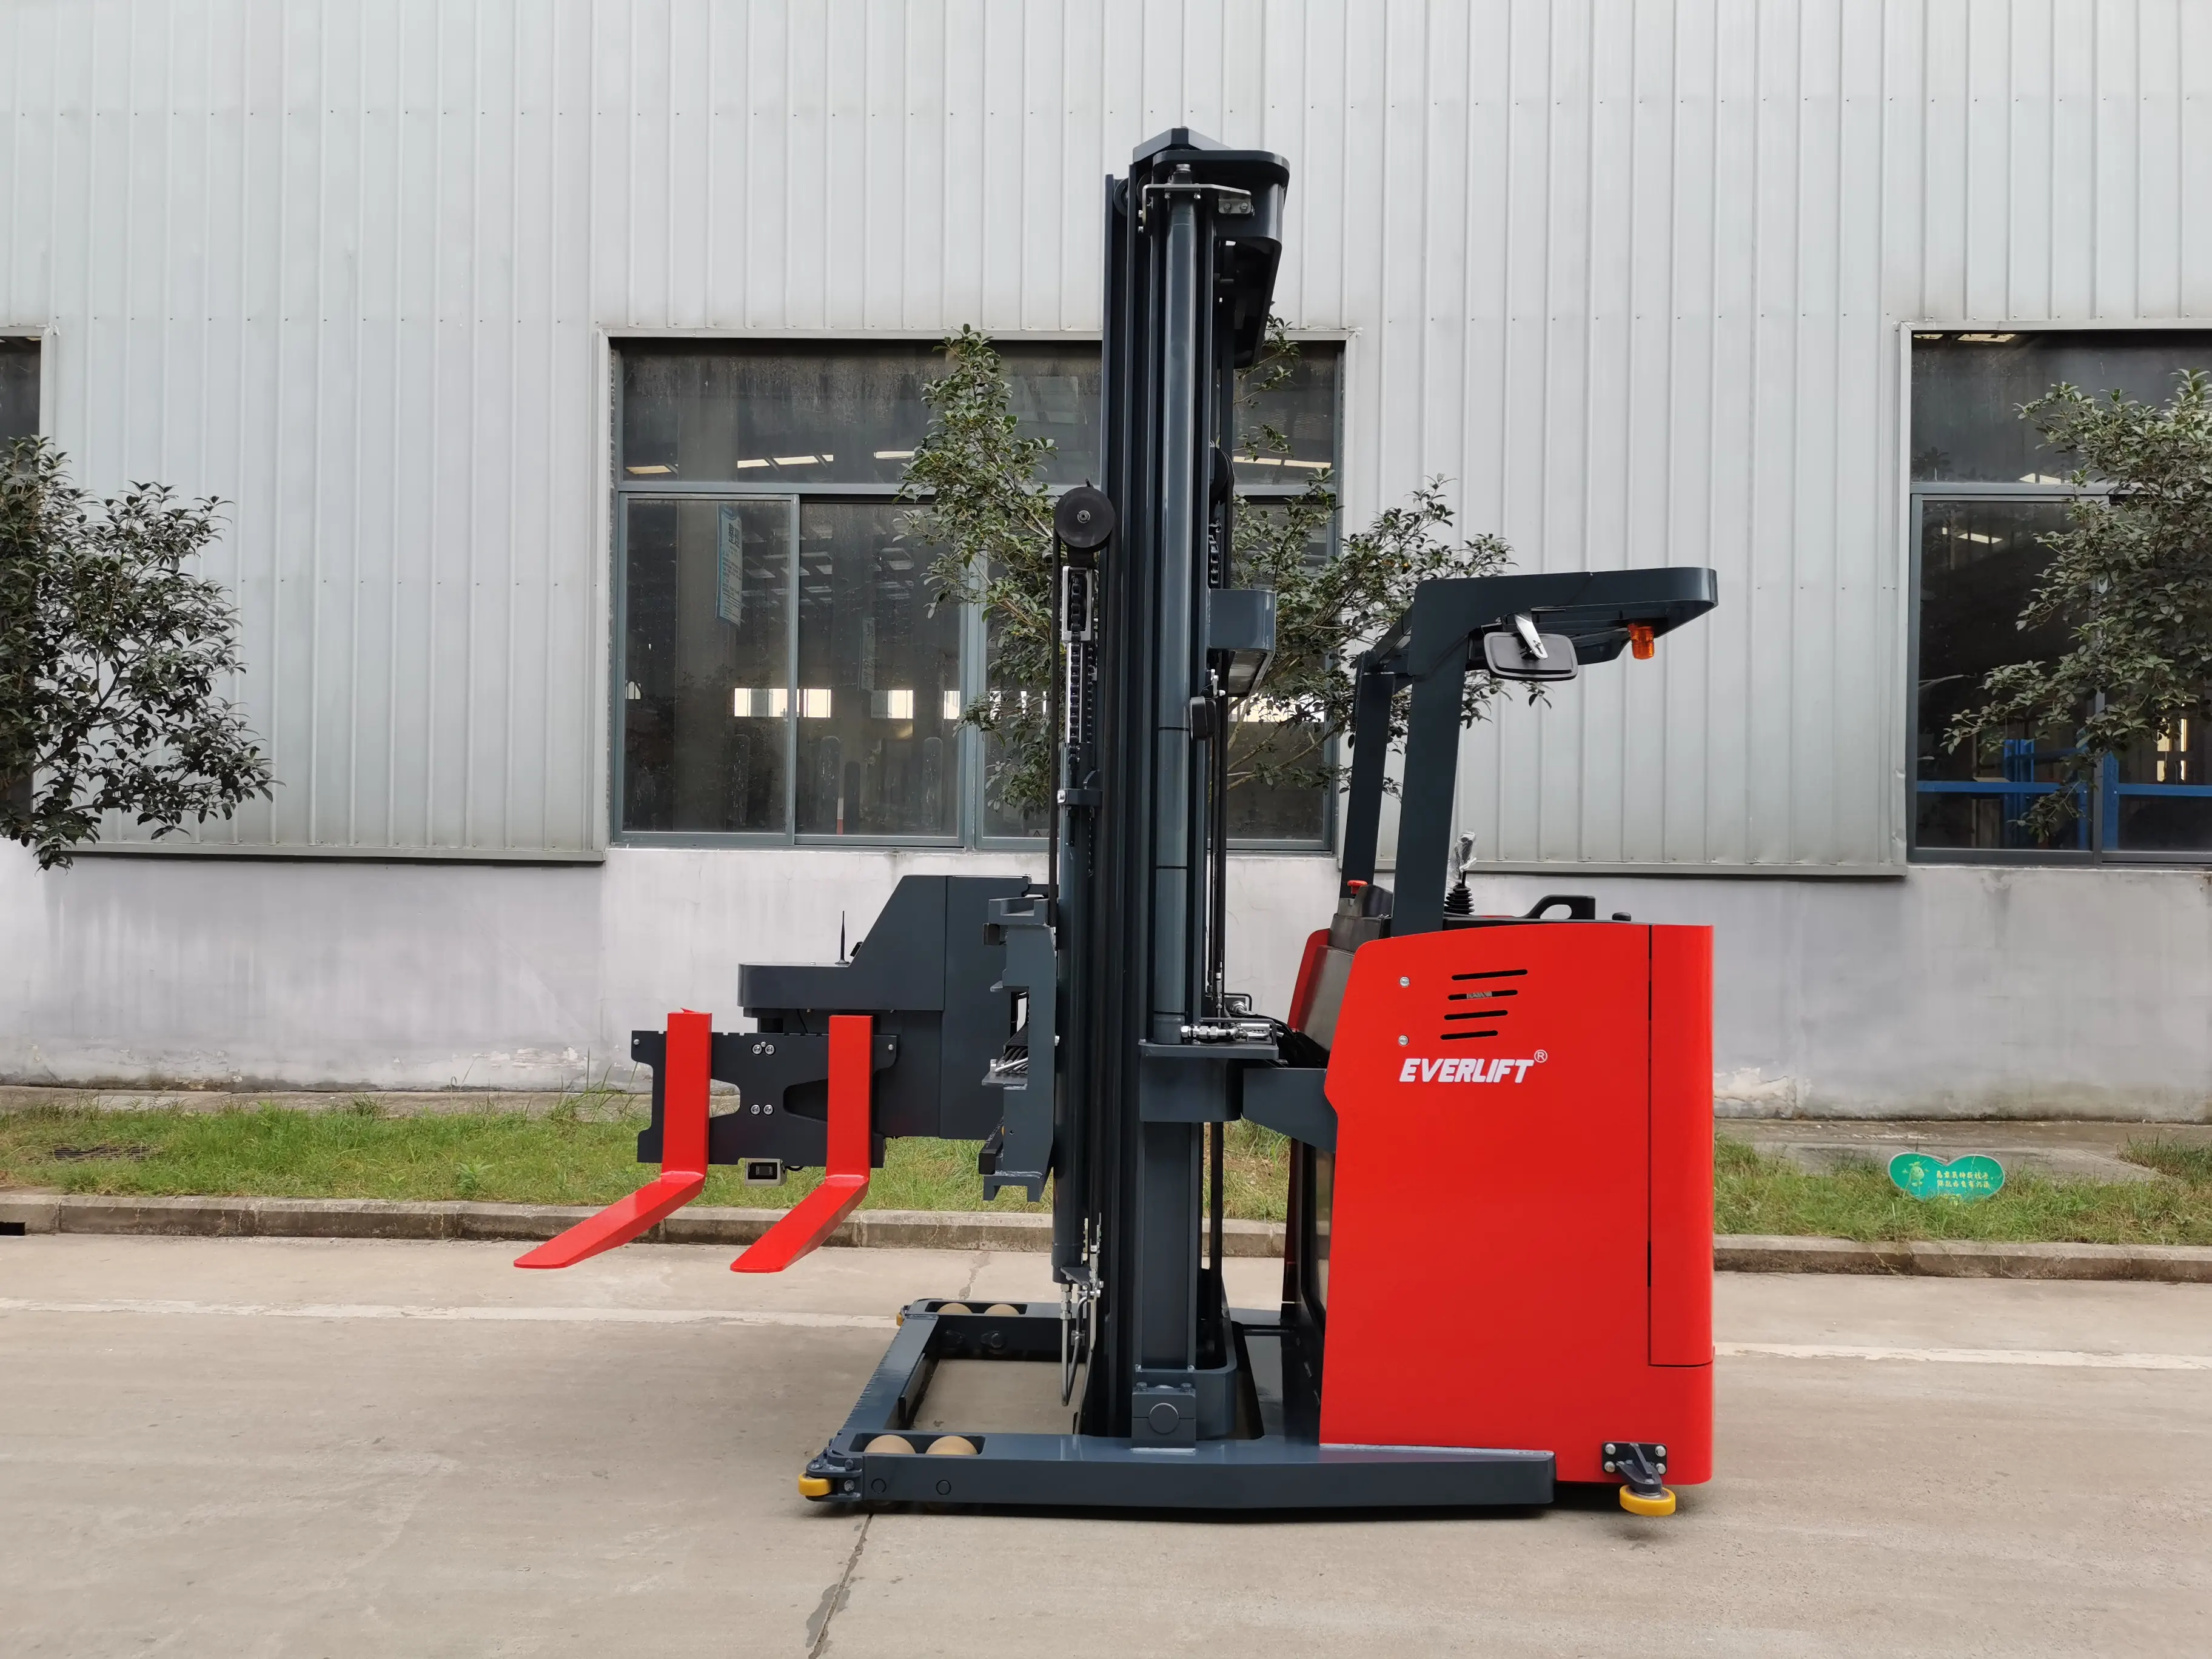 EVERLIFT 3000kg Three Ways Forklift Triplex Mast with Full Free Lifting And Side Shifter Portable Forklift Seated Forklift